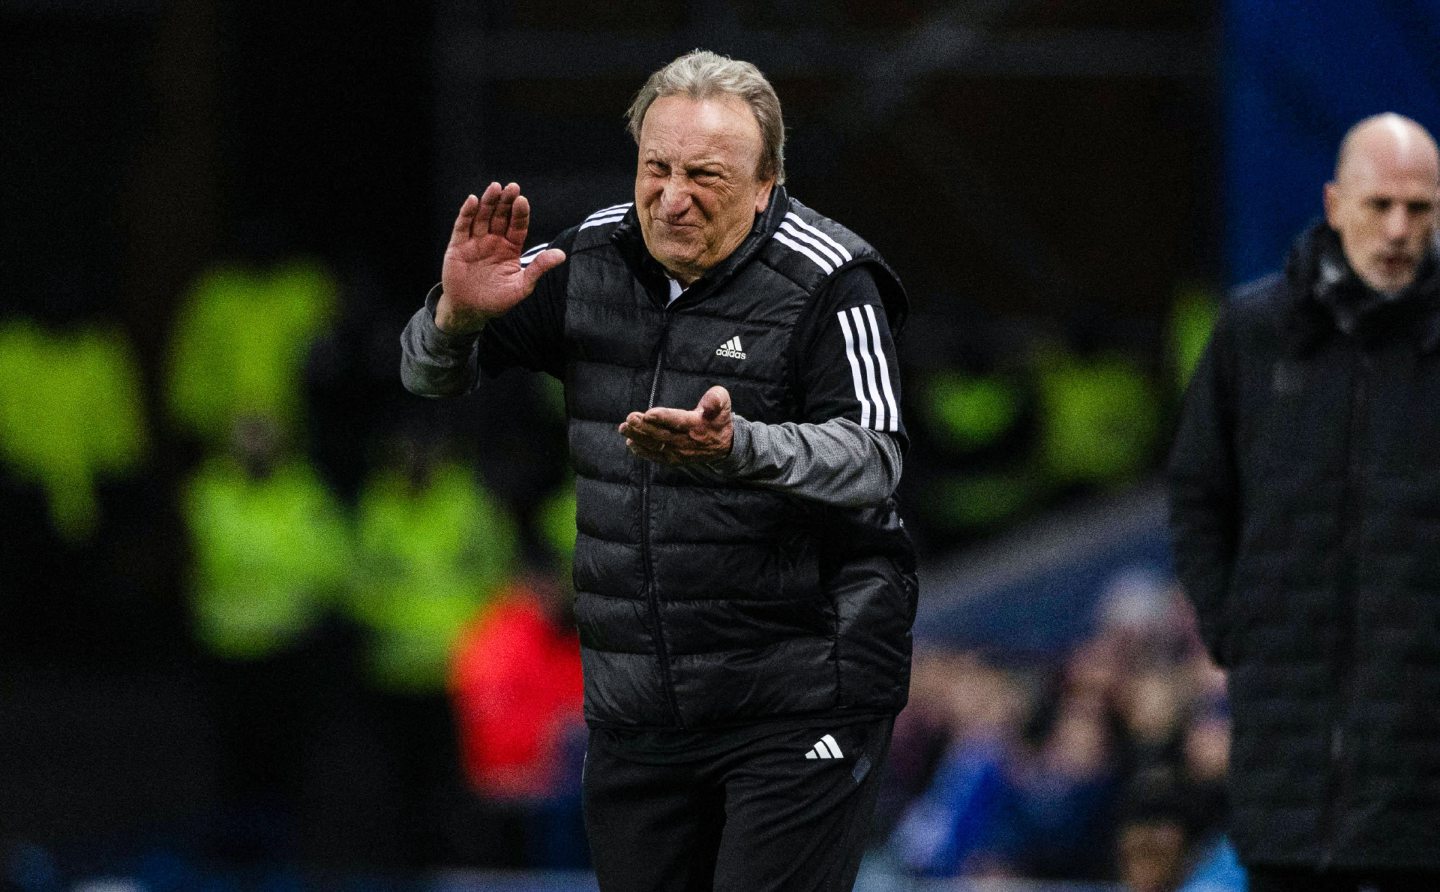 Aberdeen manager Neil Warnock during the 2-1 defeat to Rangers at Ibrox. Image: SNS